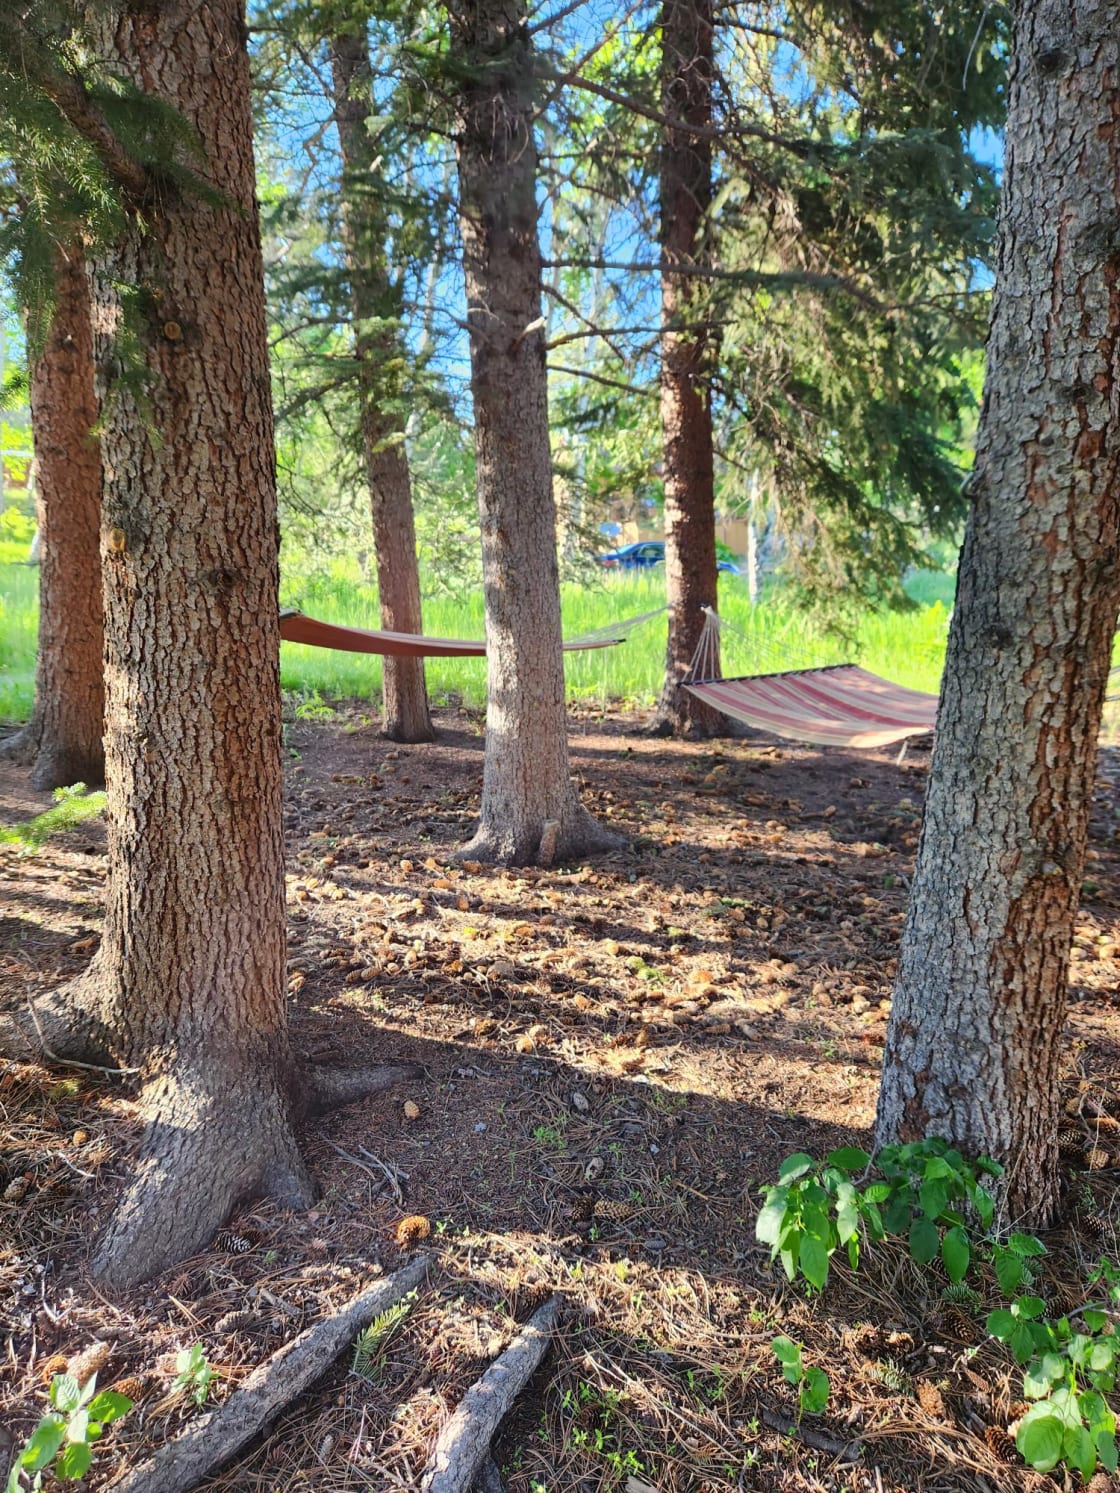 Relax in Hammock Gulch and listen to the wind in the trees. 